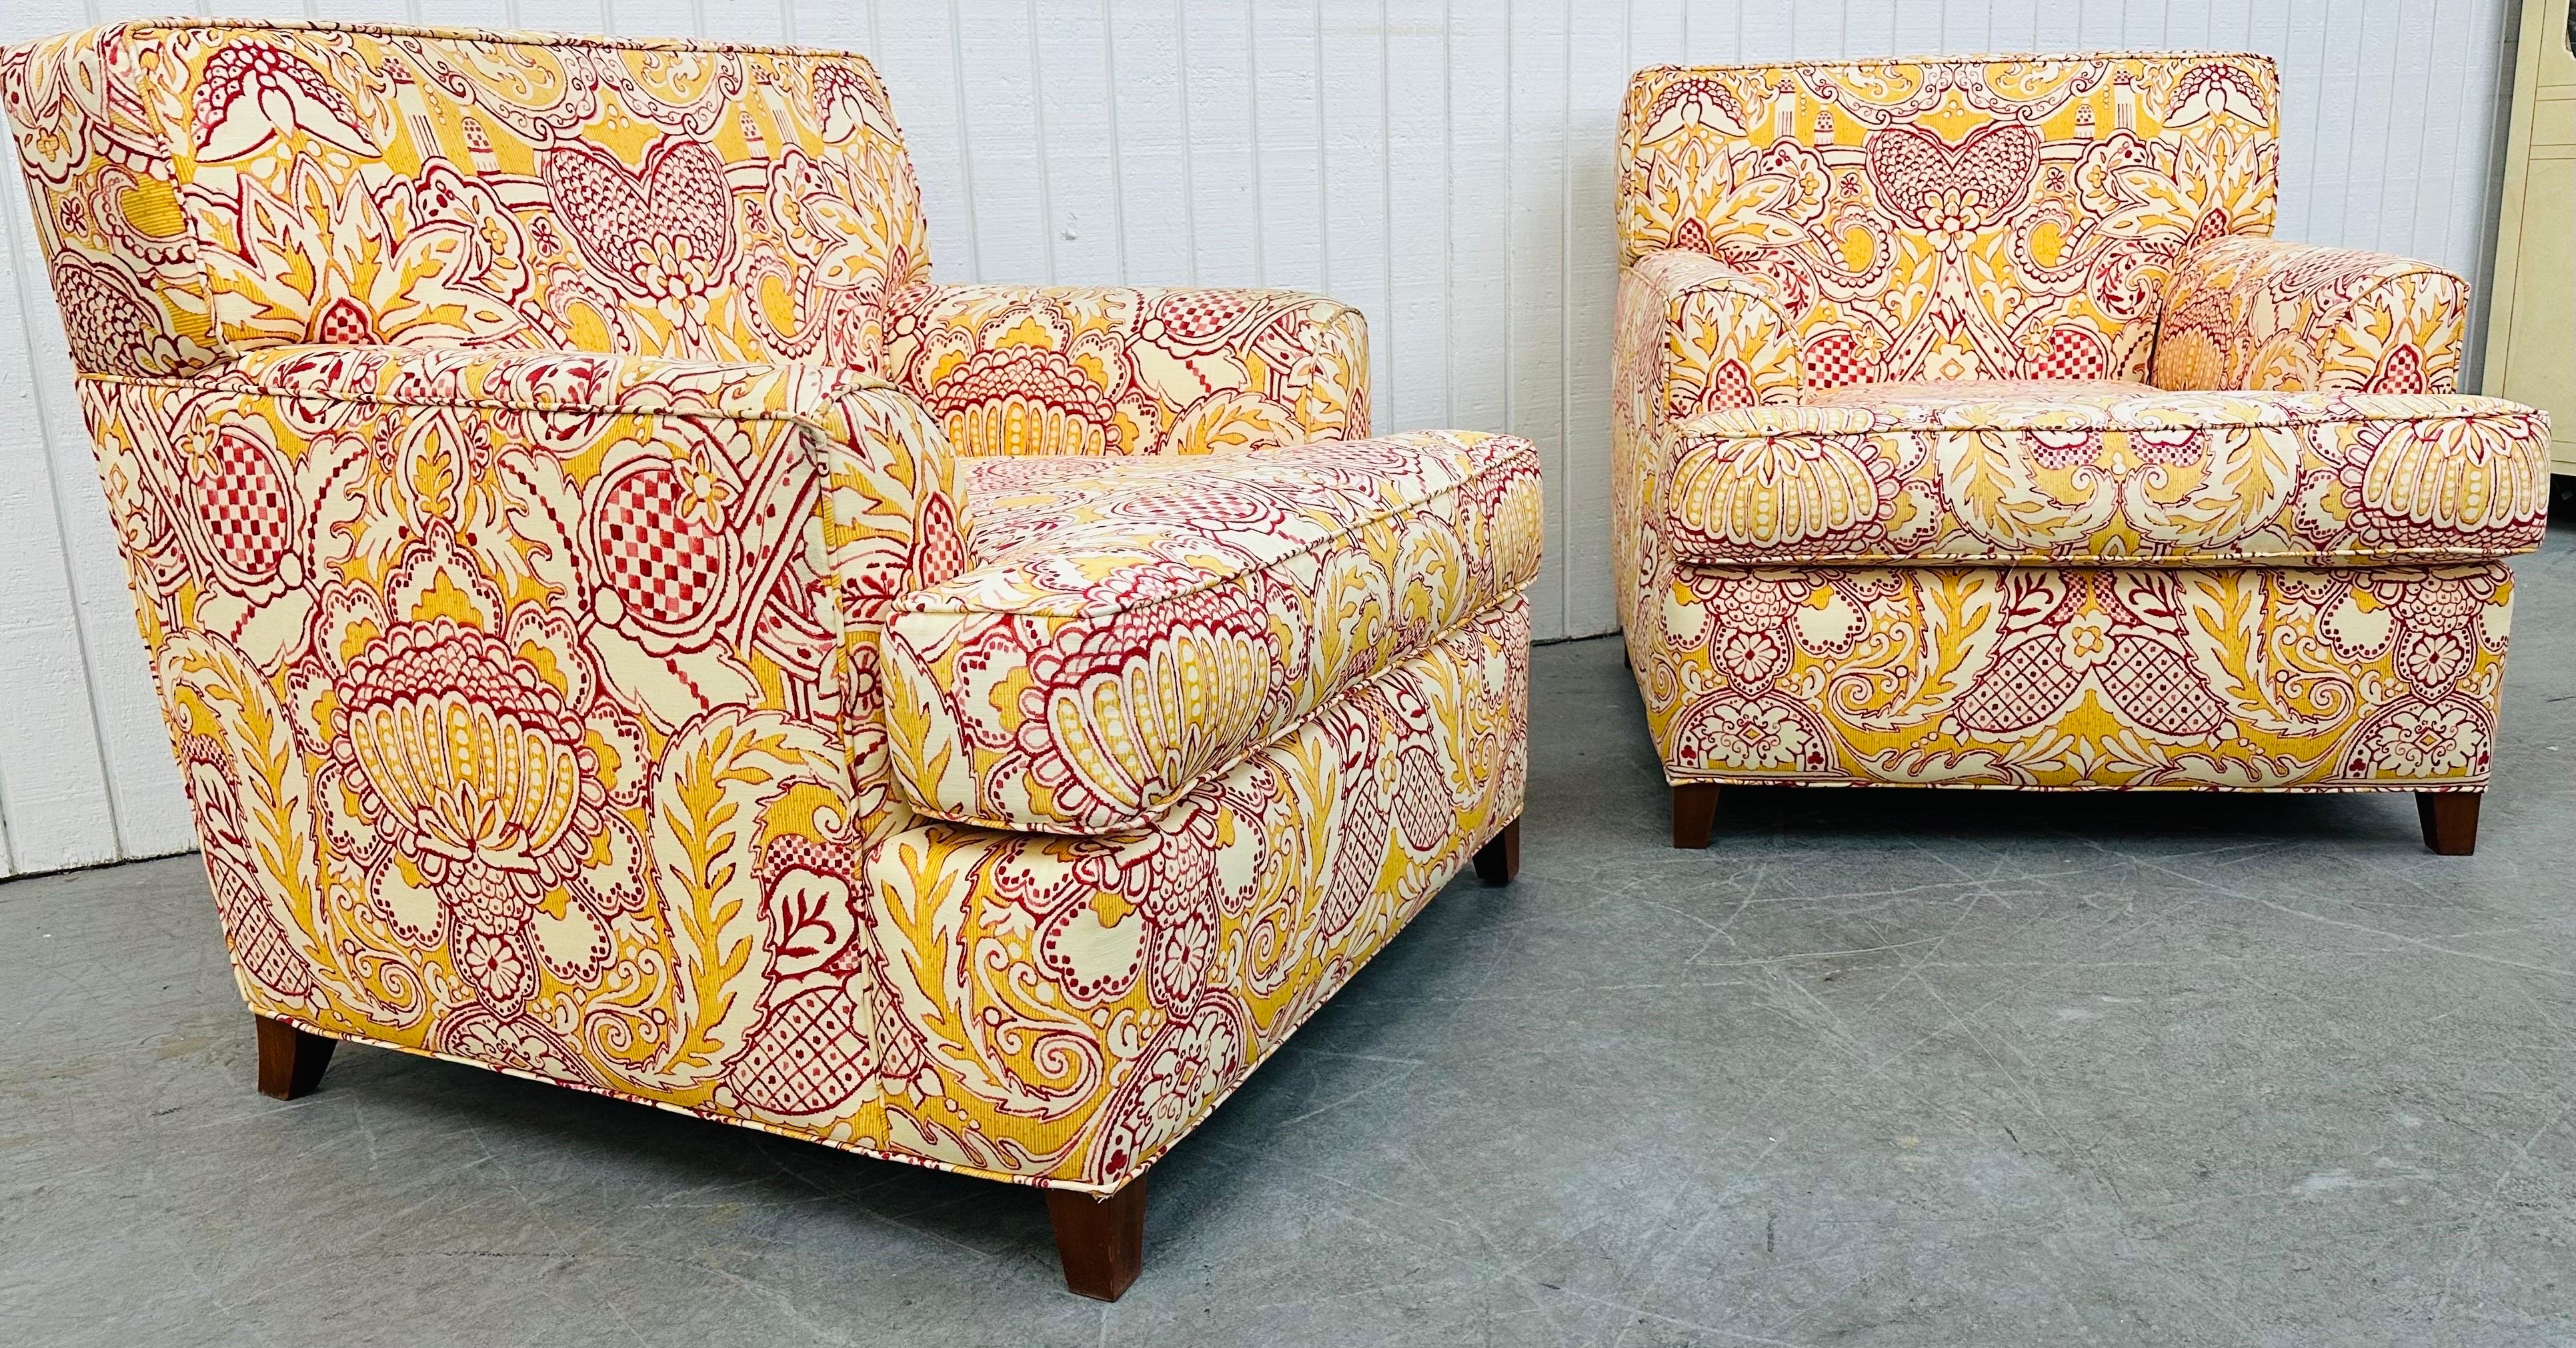 This listing is for a pair of Modern Oversized Floral Club Chairs. Featuring a straight line design, bright decorative floral upholstery, modern legs, and comfy cushions. This is an exceptional combination of quality and design by Shuster Design